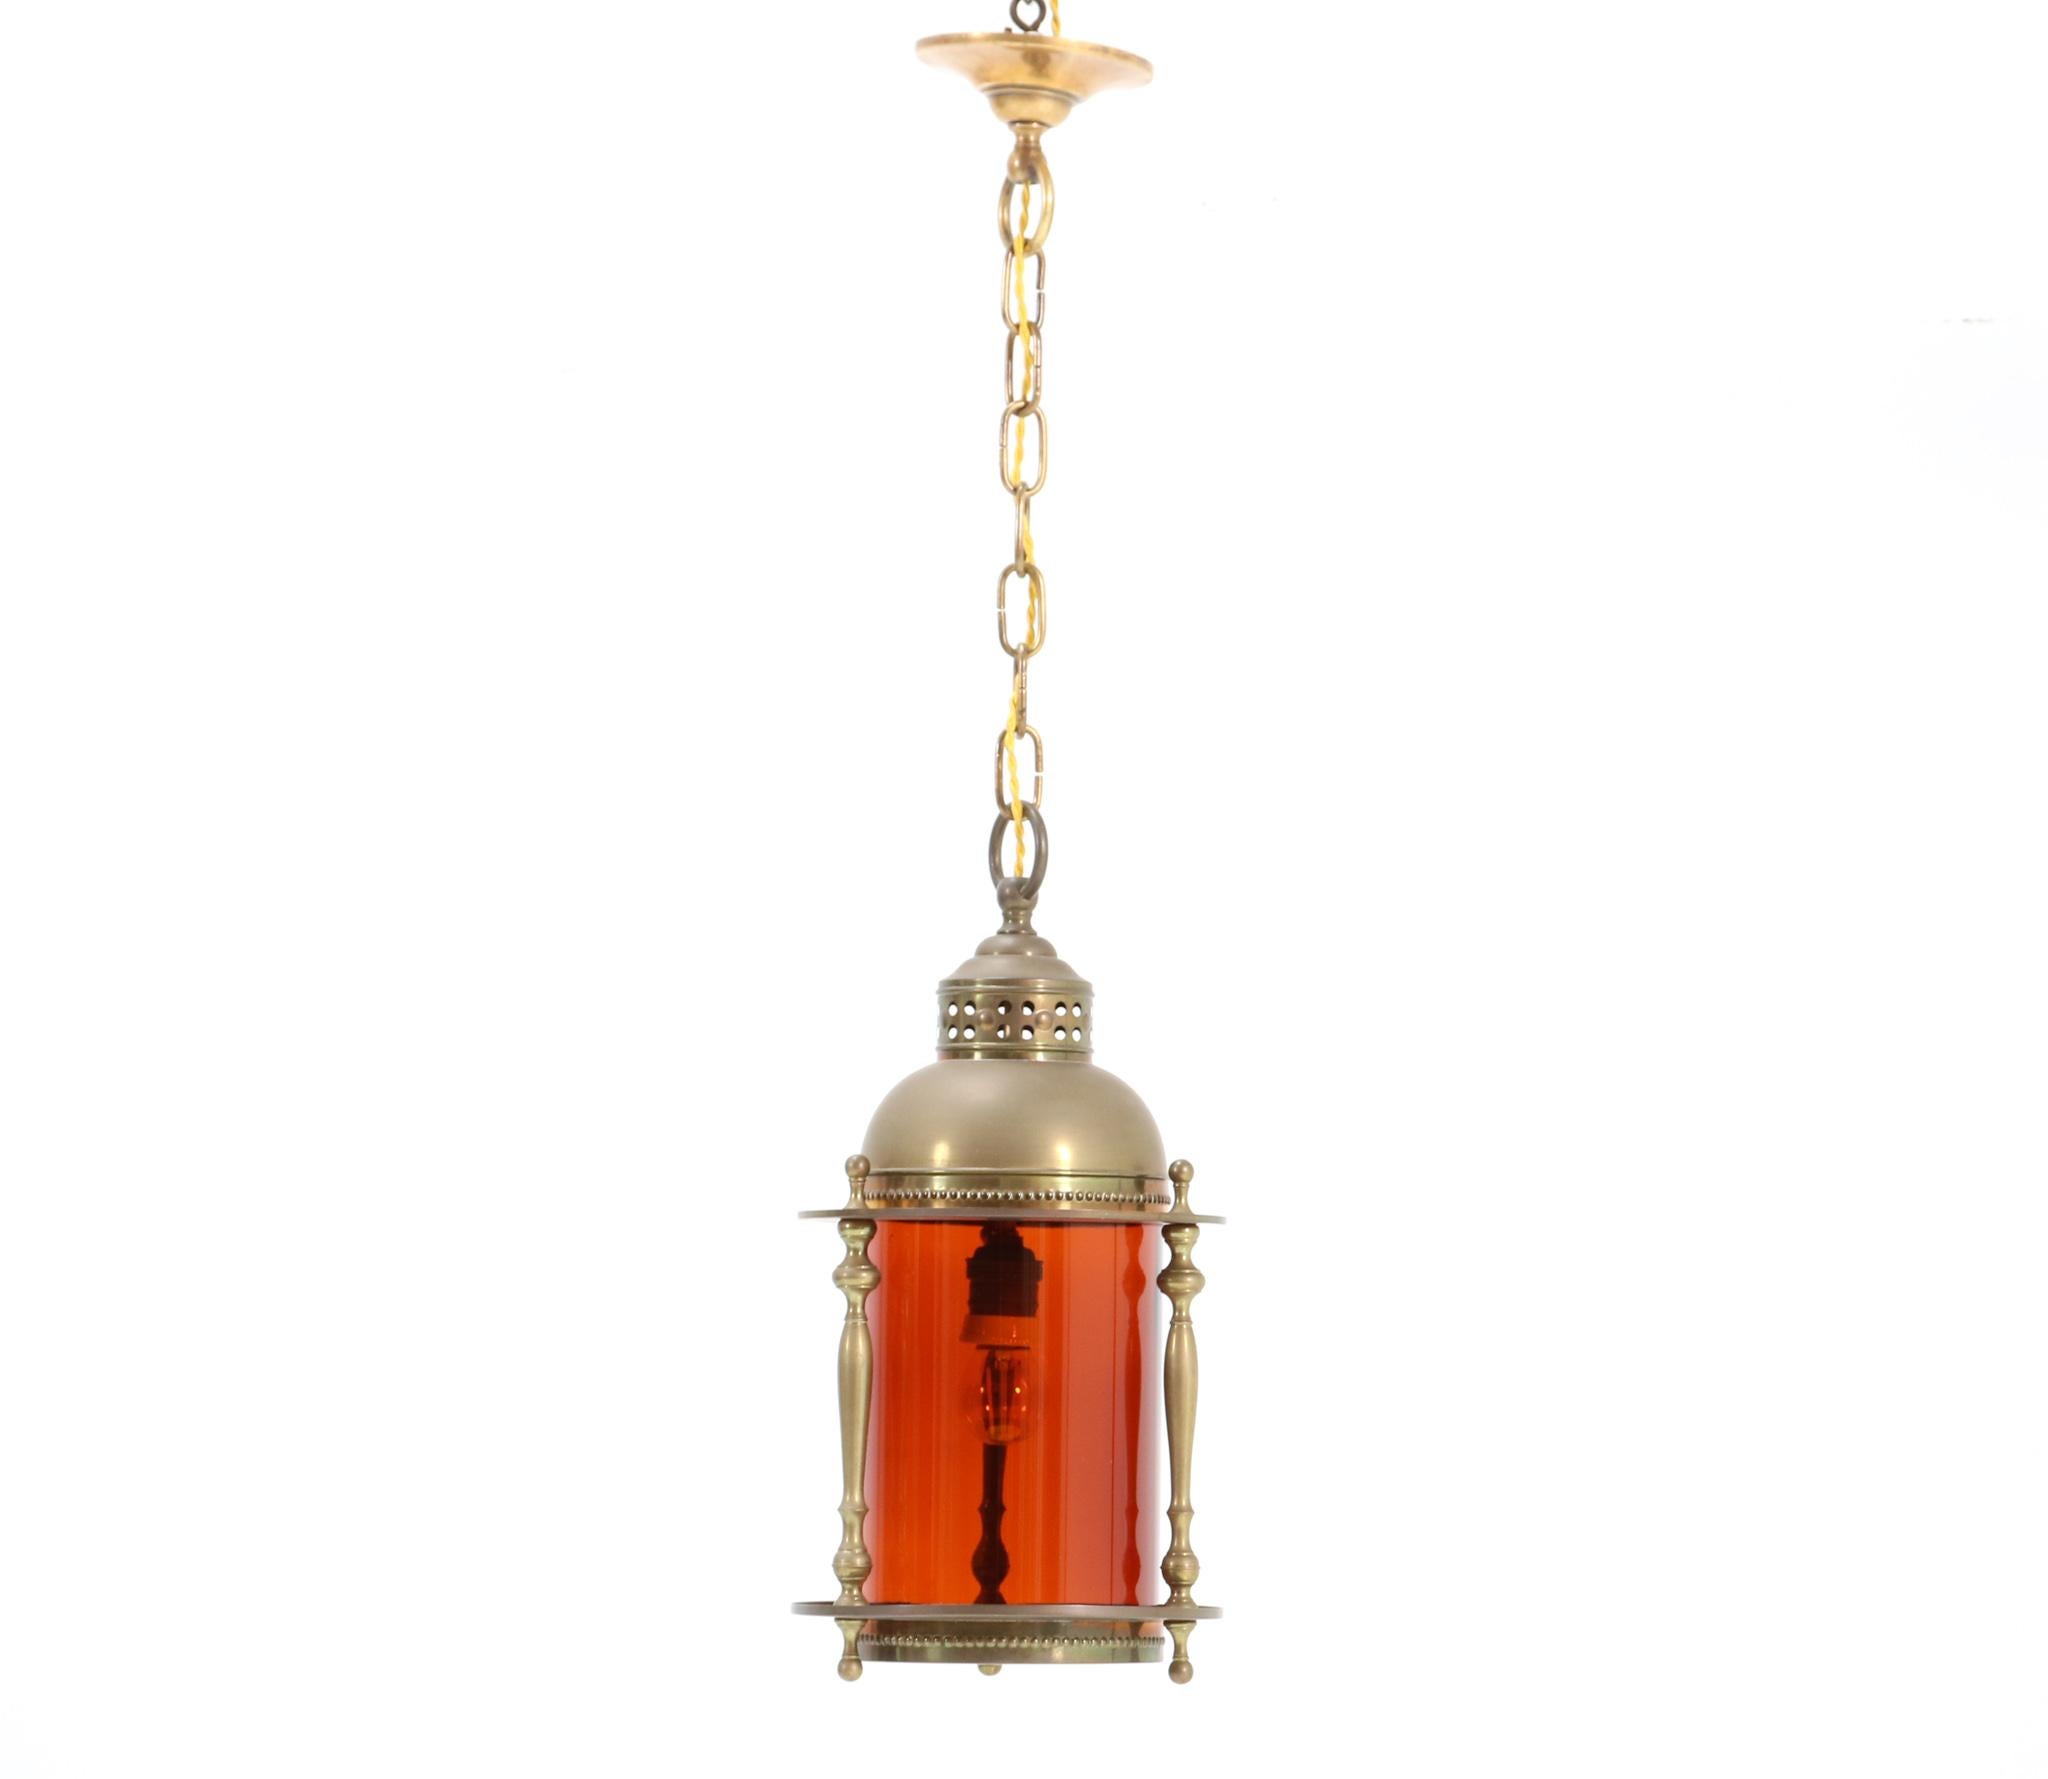 Patinated Brass Art Nouveau Lantern with Original Glass Shade, 1900s In Good Condition For Sale In Amsterdam, NL